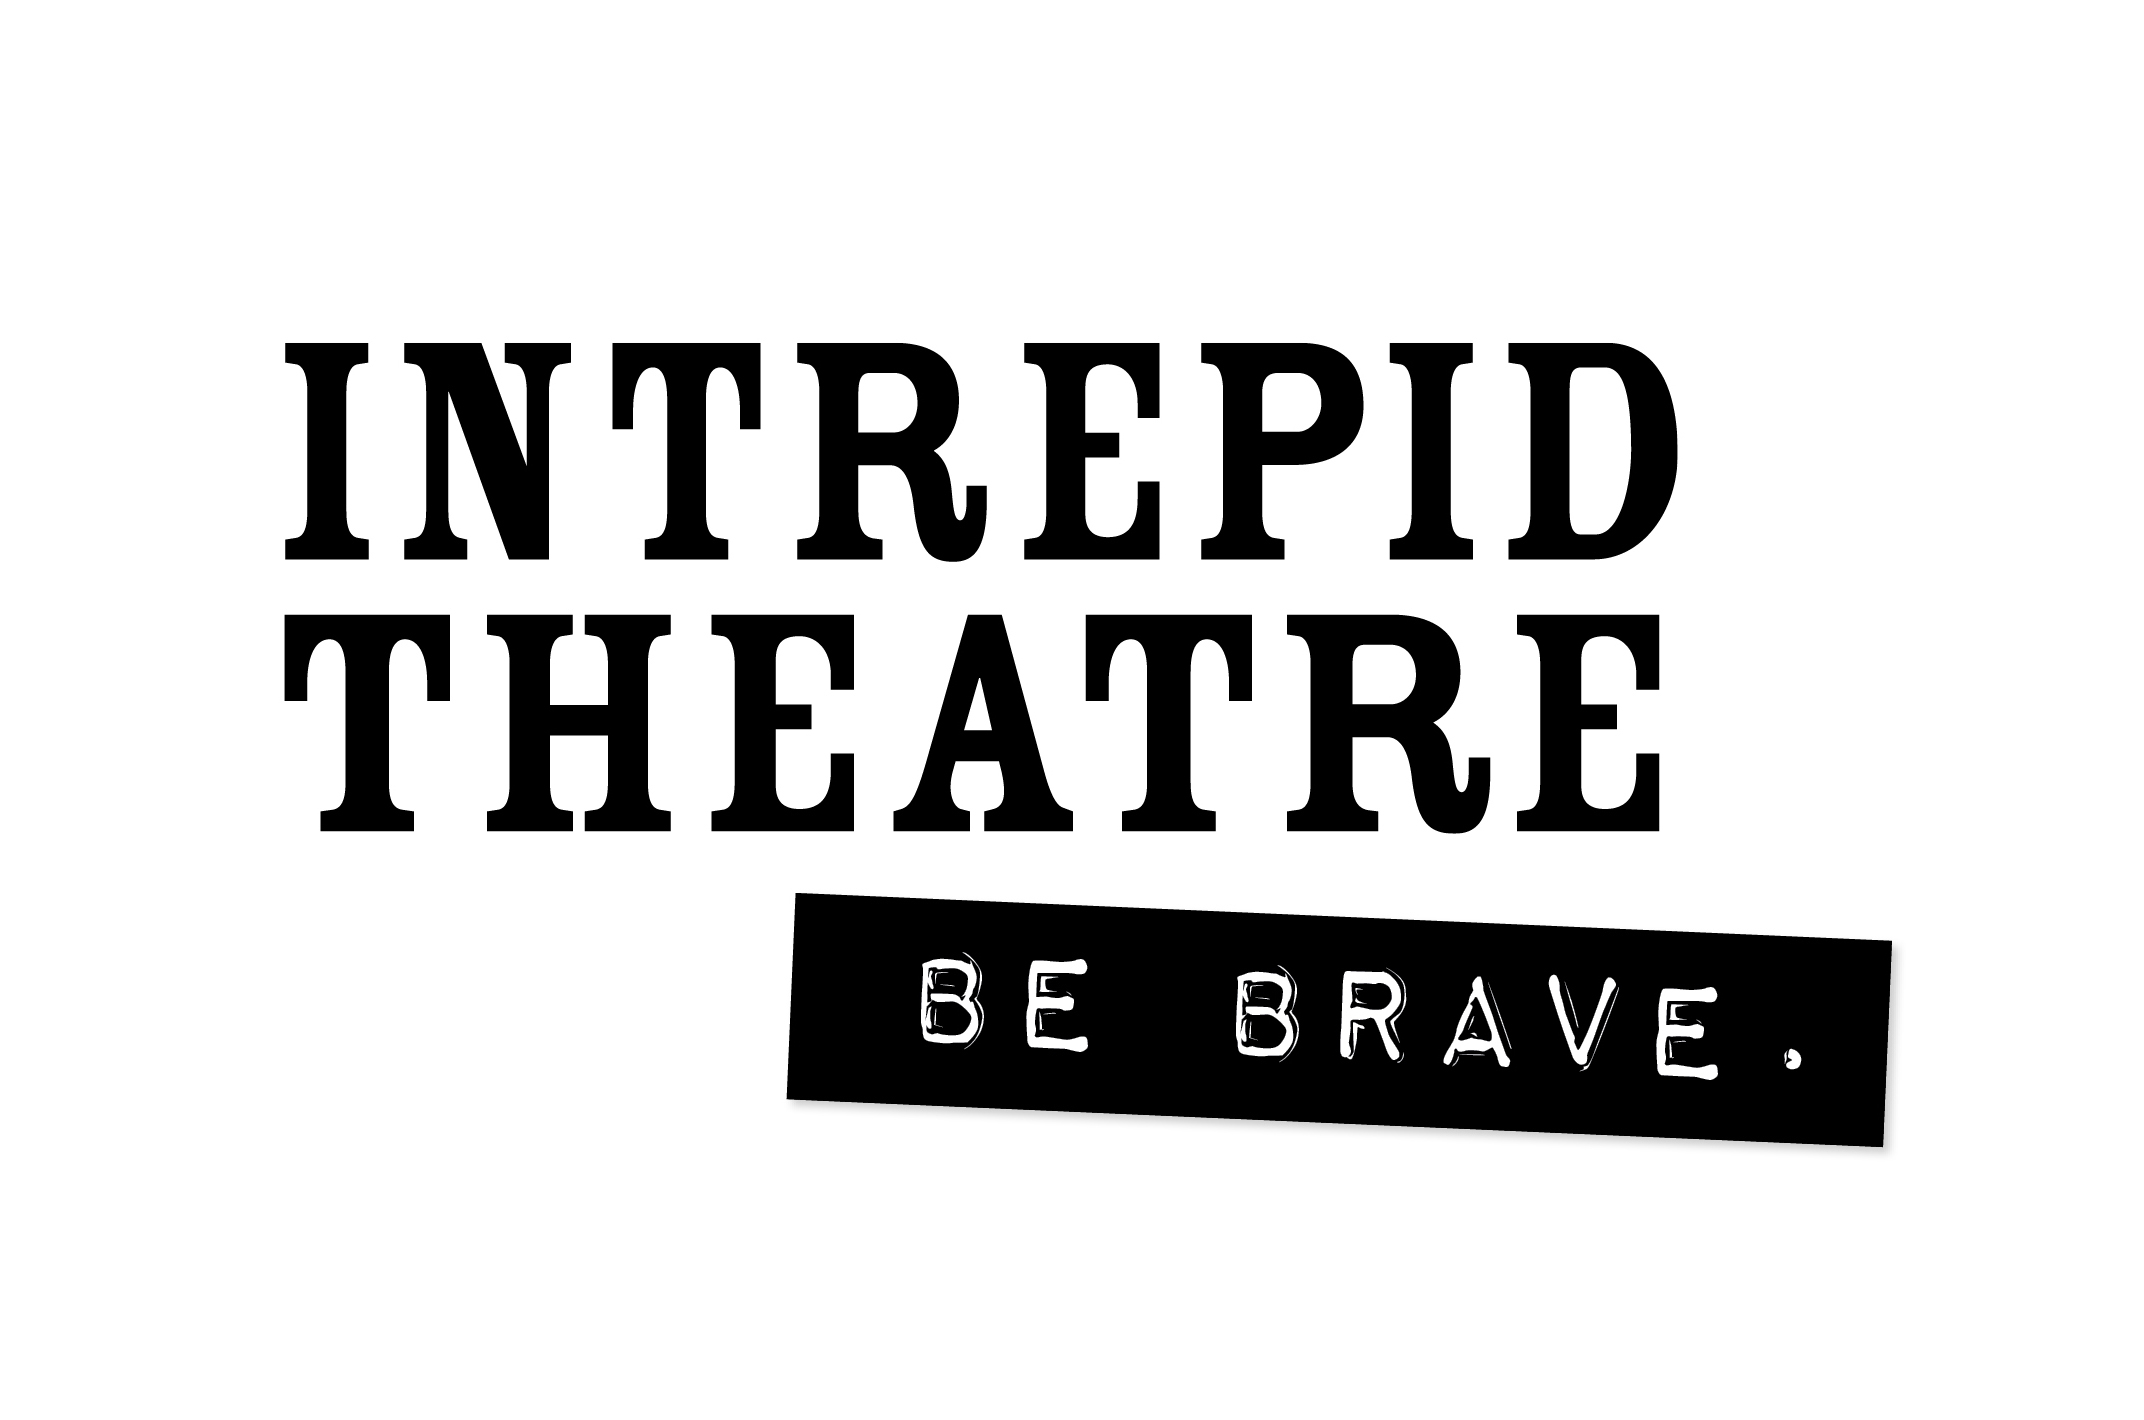 Intrepid Theatre Wordmark in Cowboy Font, with the subtitle "Be Brave." cut out from a labelling machine.